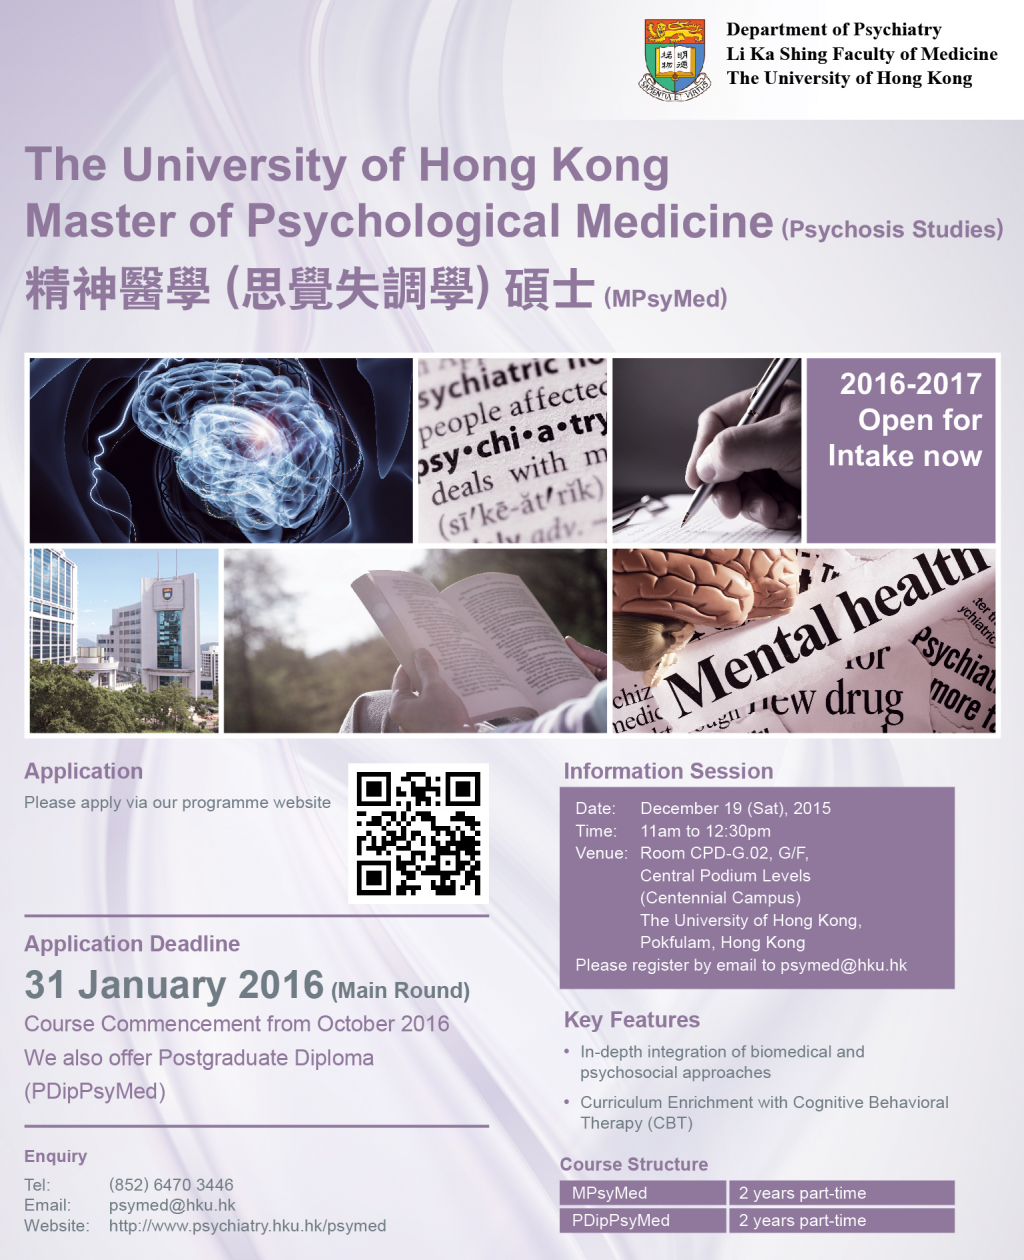 Master in Psychological Medicine Open for applicaiton (info session on Dec19) Course application deadline by Jan31